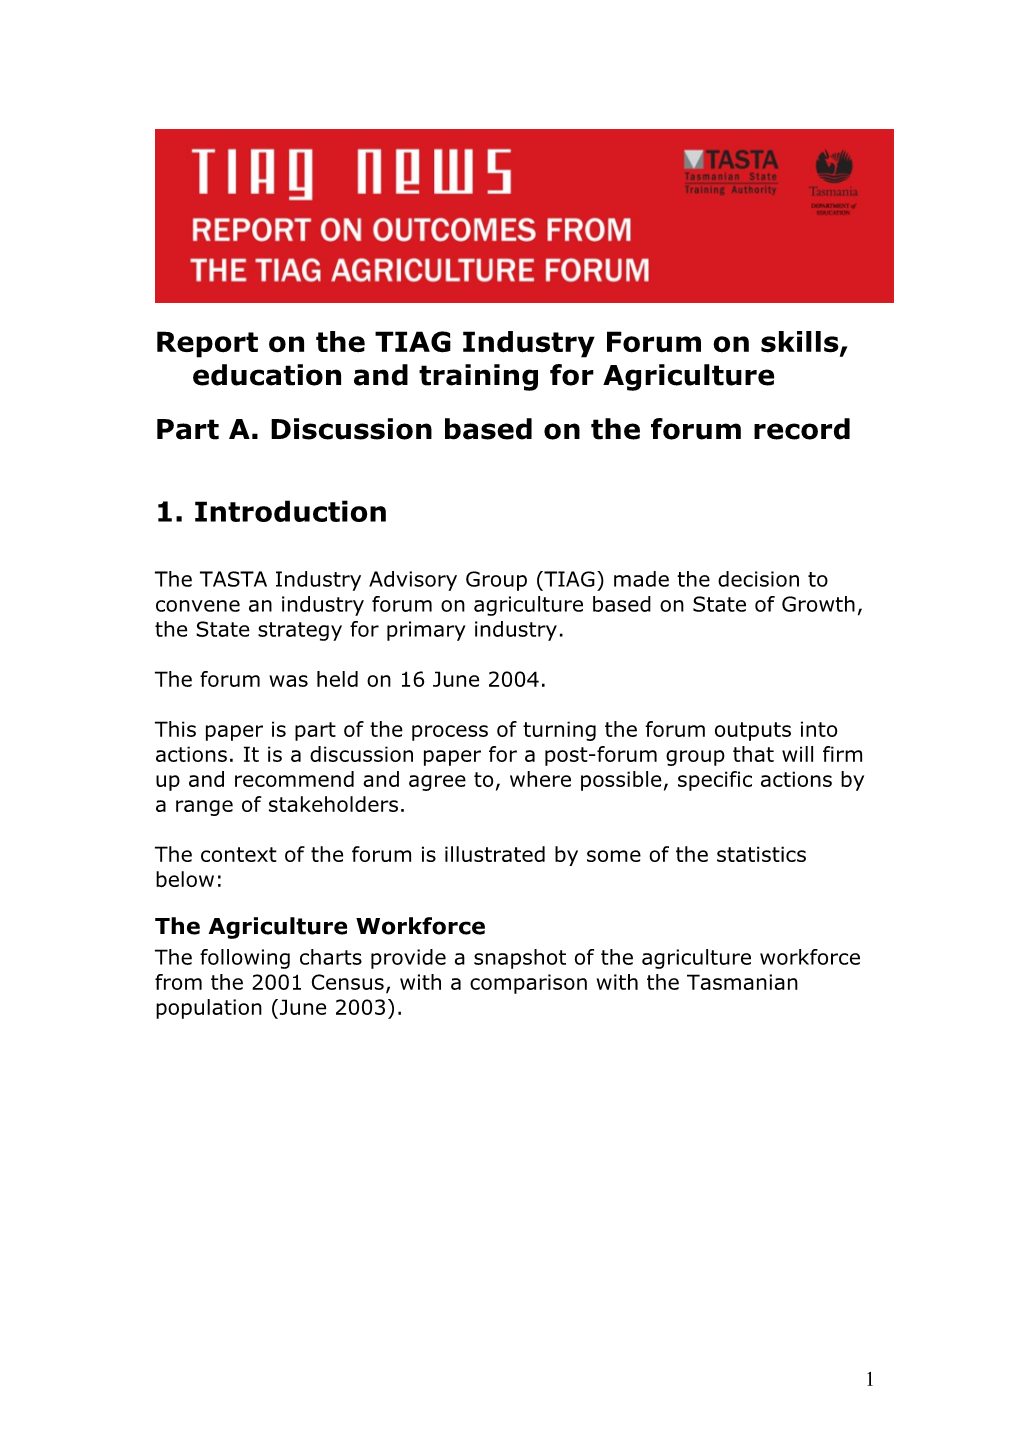 TIAG Agriculture Forum Report (Word)